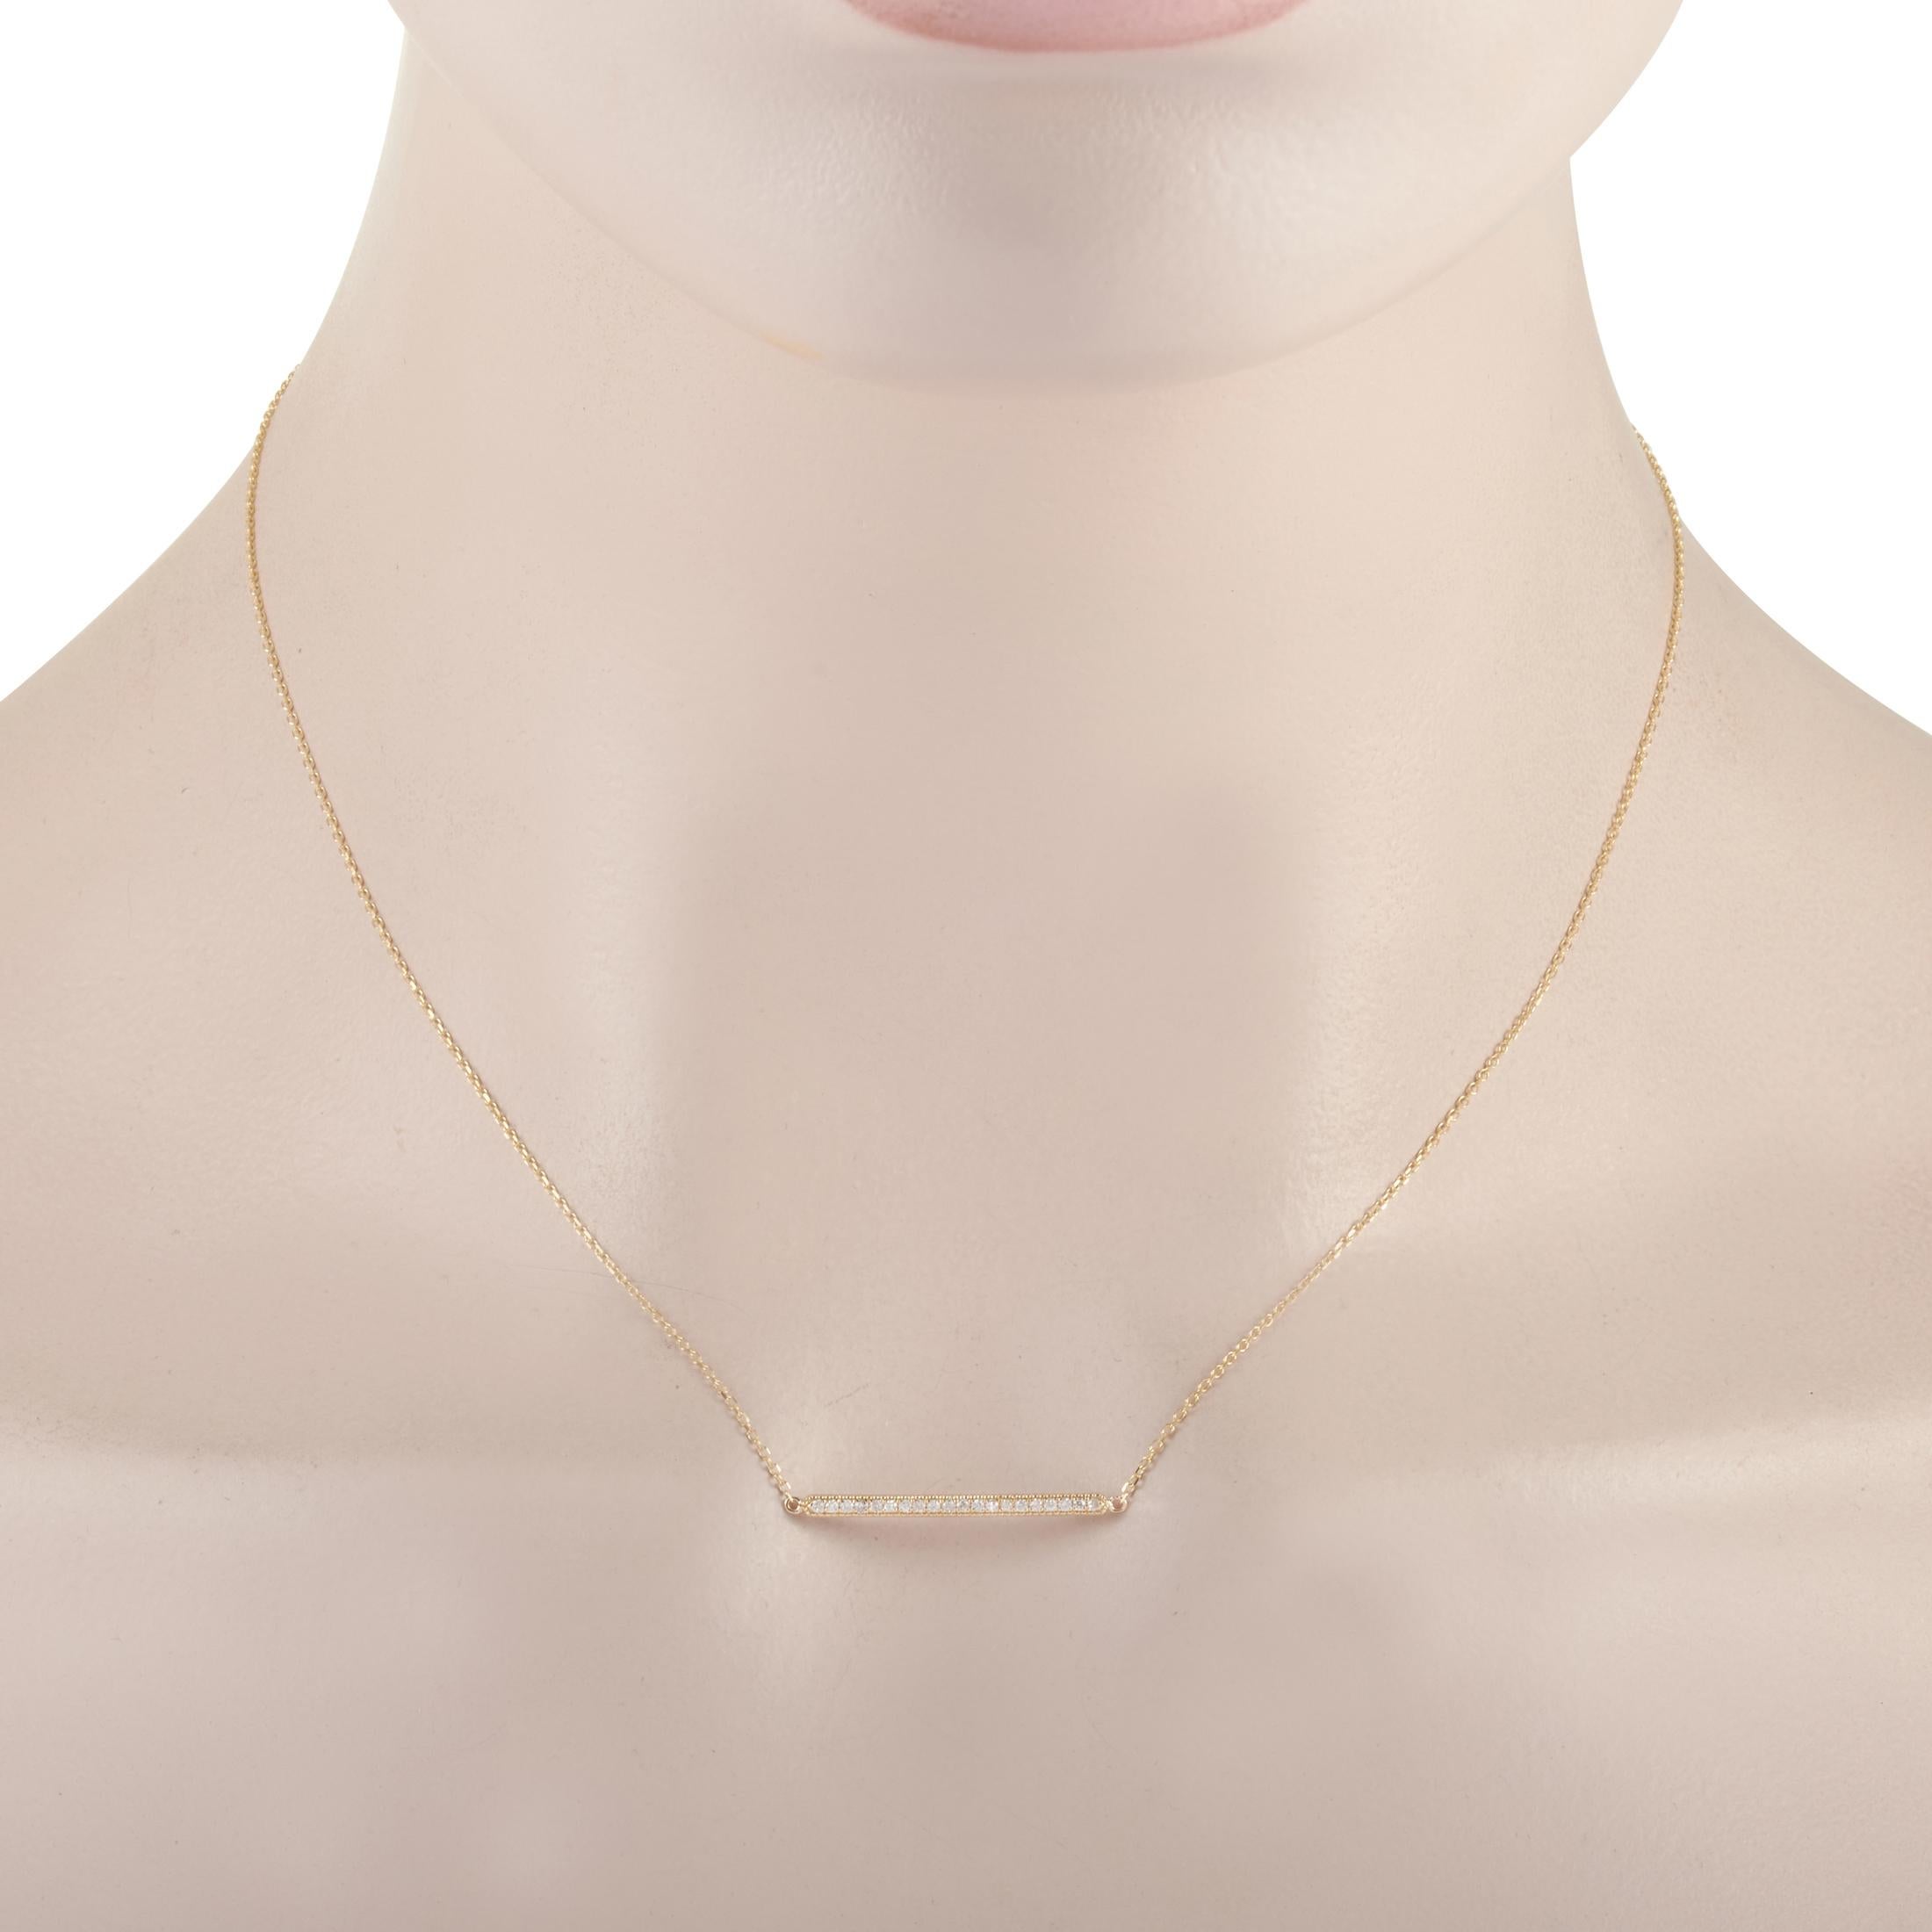 This LB Exclusive necklace is crafted from 14K yellow gold and weighs 1.7 grams. It is presented with a 15” chain and boasts a pendant that measures 0.07” in length and 1” in width. The necklace is set with diamonds that total 0.10 carats.
 
